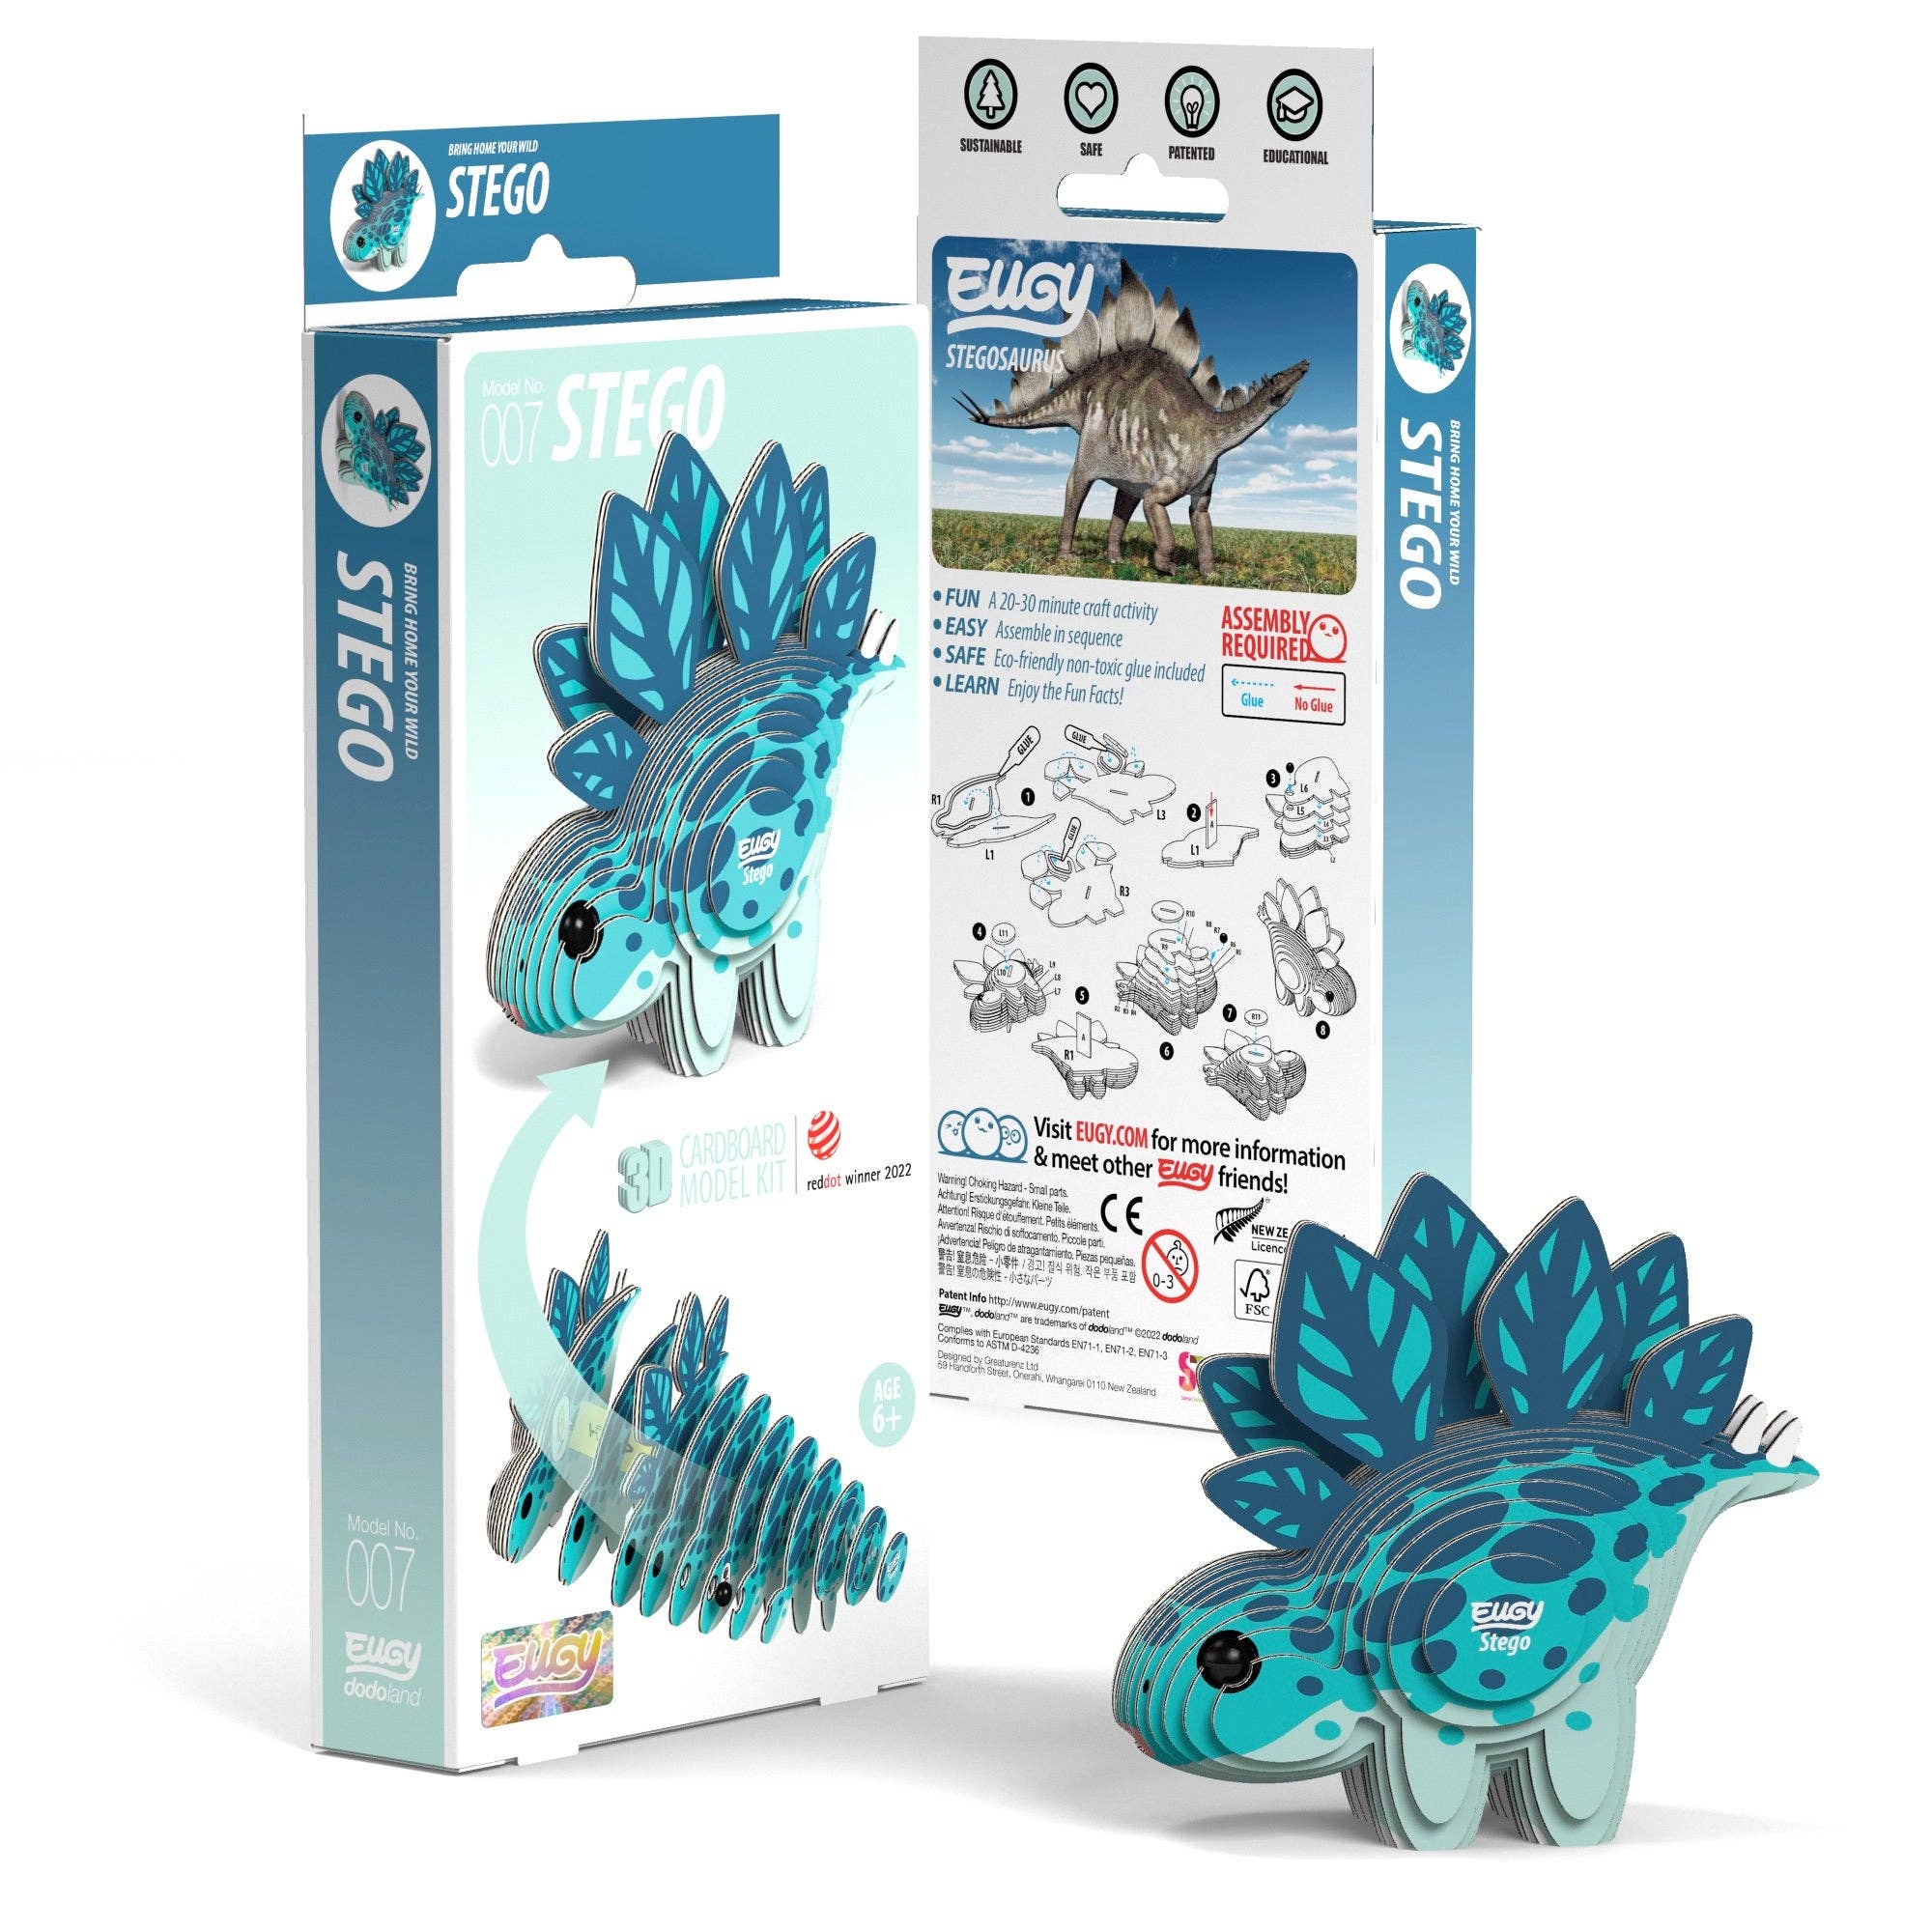 Two packages of the Stego puzzle next to each other, one box is displaying the front of the packaging. The other box is displaying the back of the packaging. A finished model is sitting infront of the two boxes.